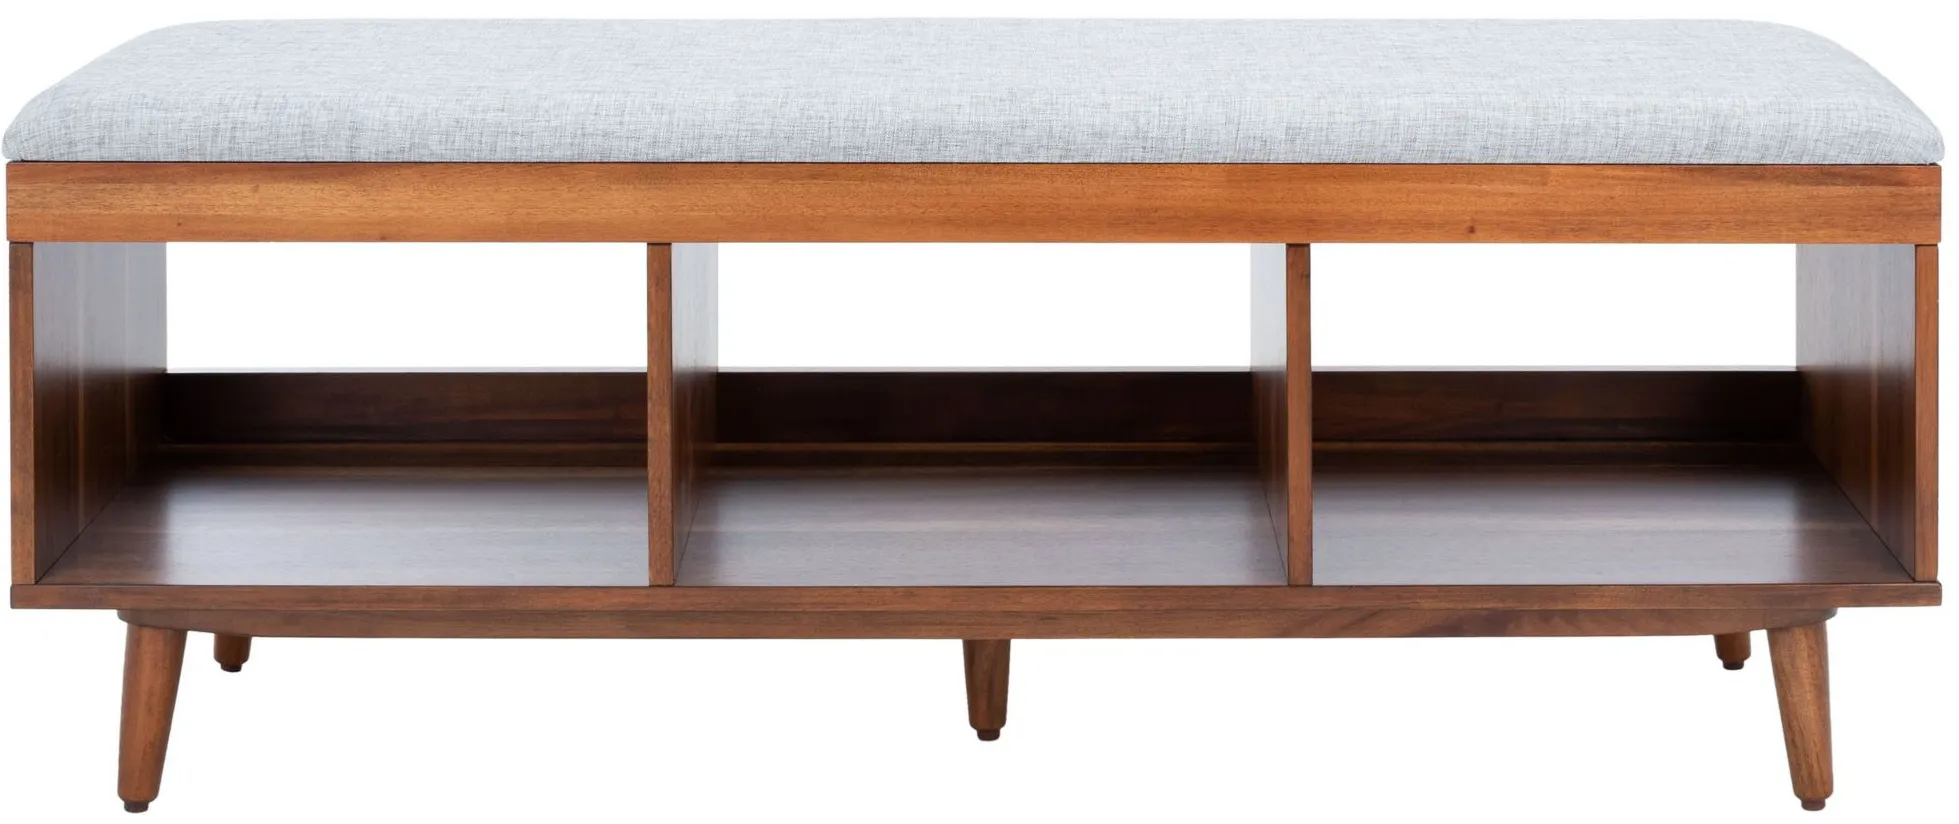 Cricket Open Shelf Bench with Cushion in Gray & Natural by Safavieh